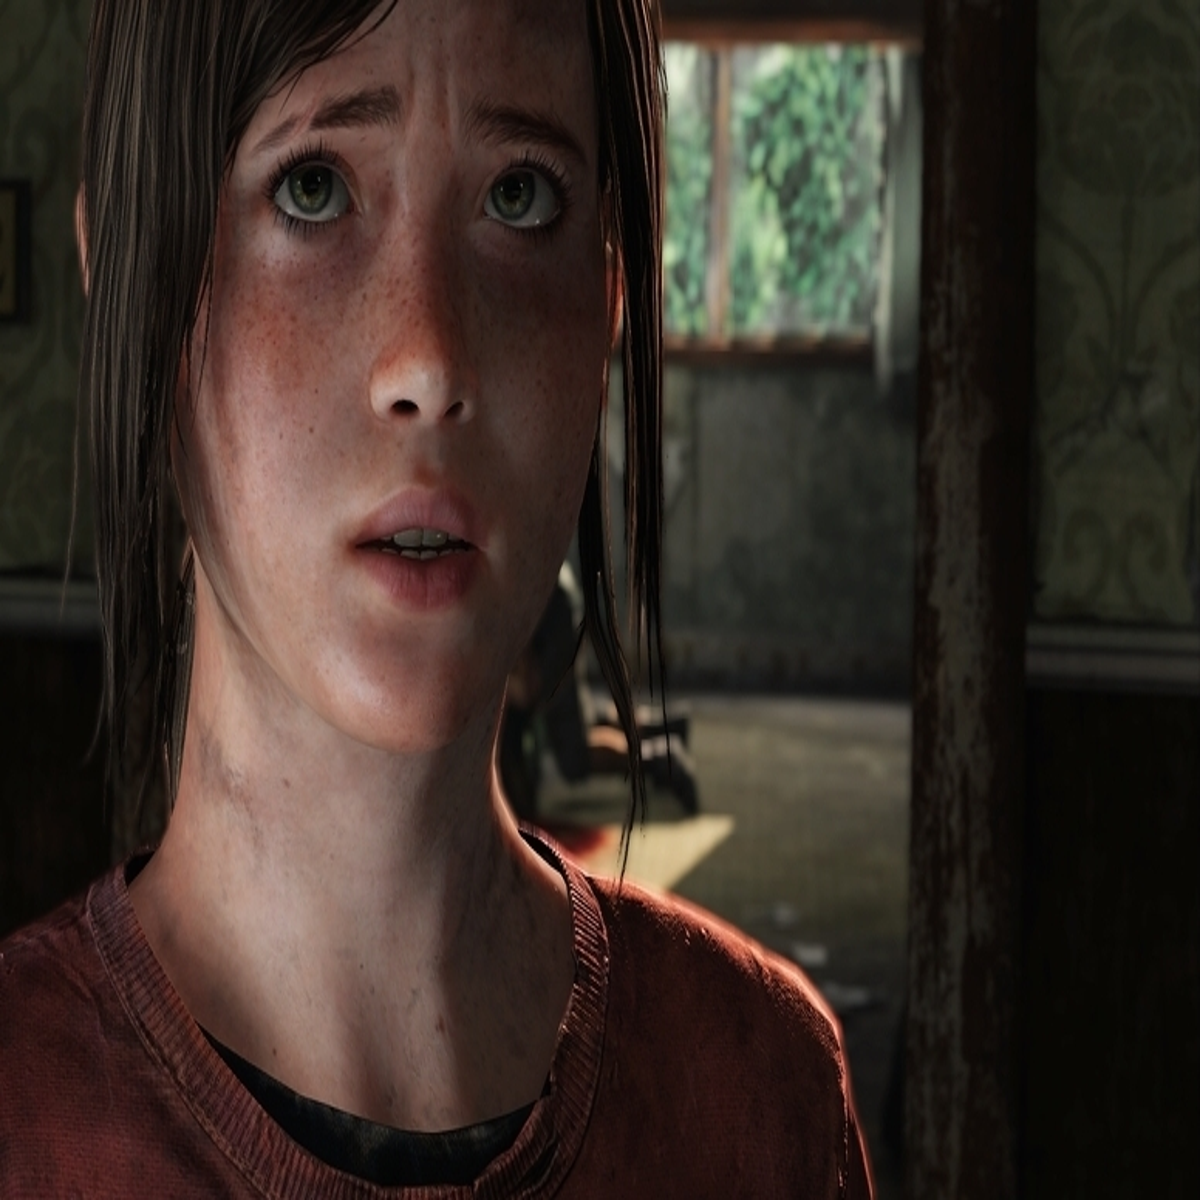 The Last Of Us - Ashley Johnson (Ellie) EXCLUSIVE Interview - Eurogamer 